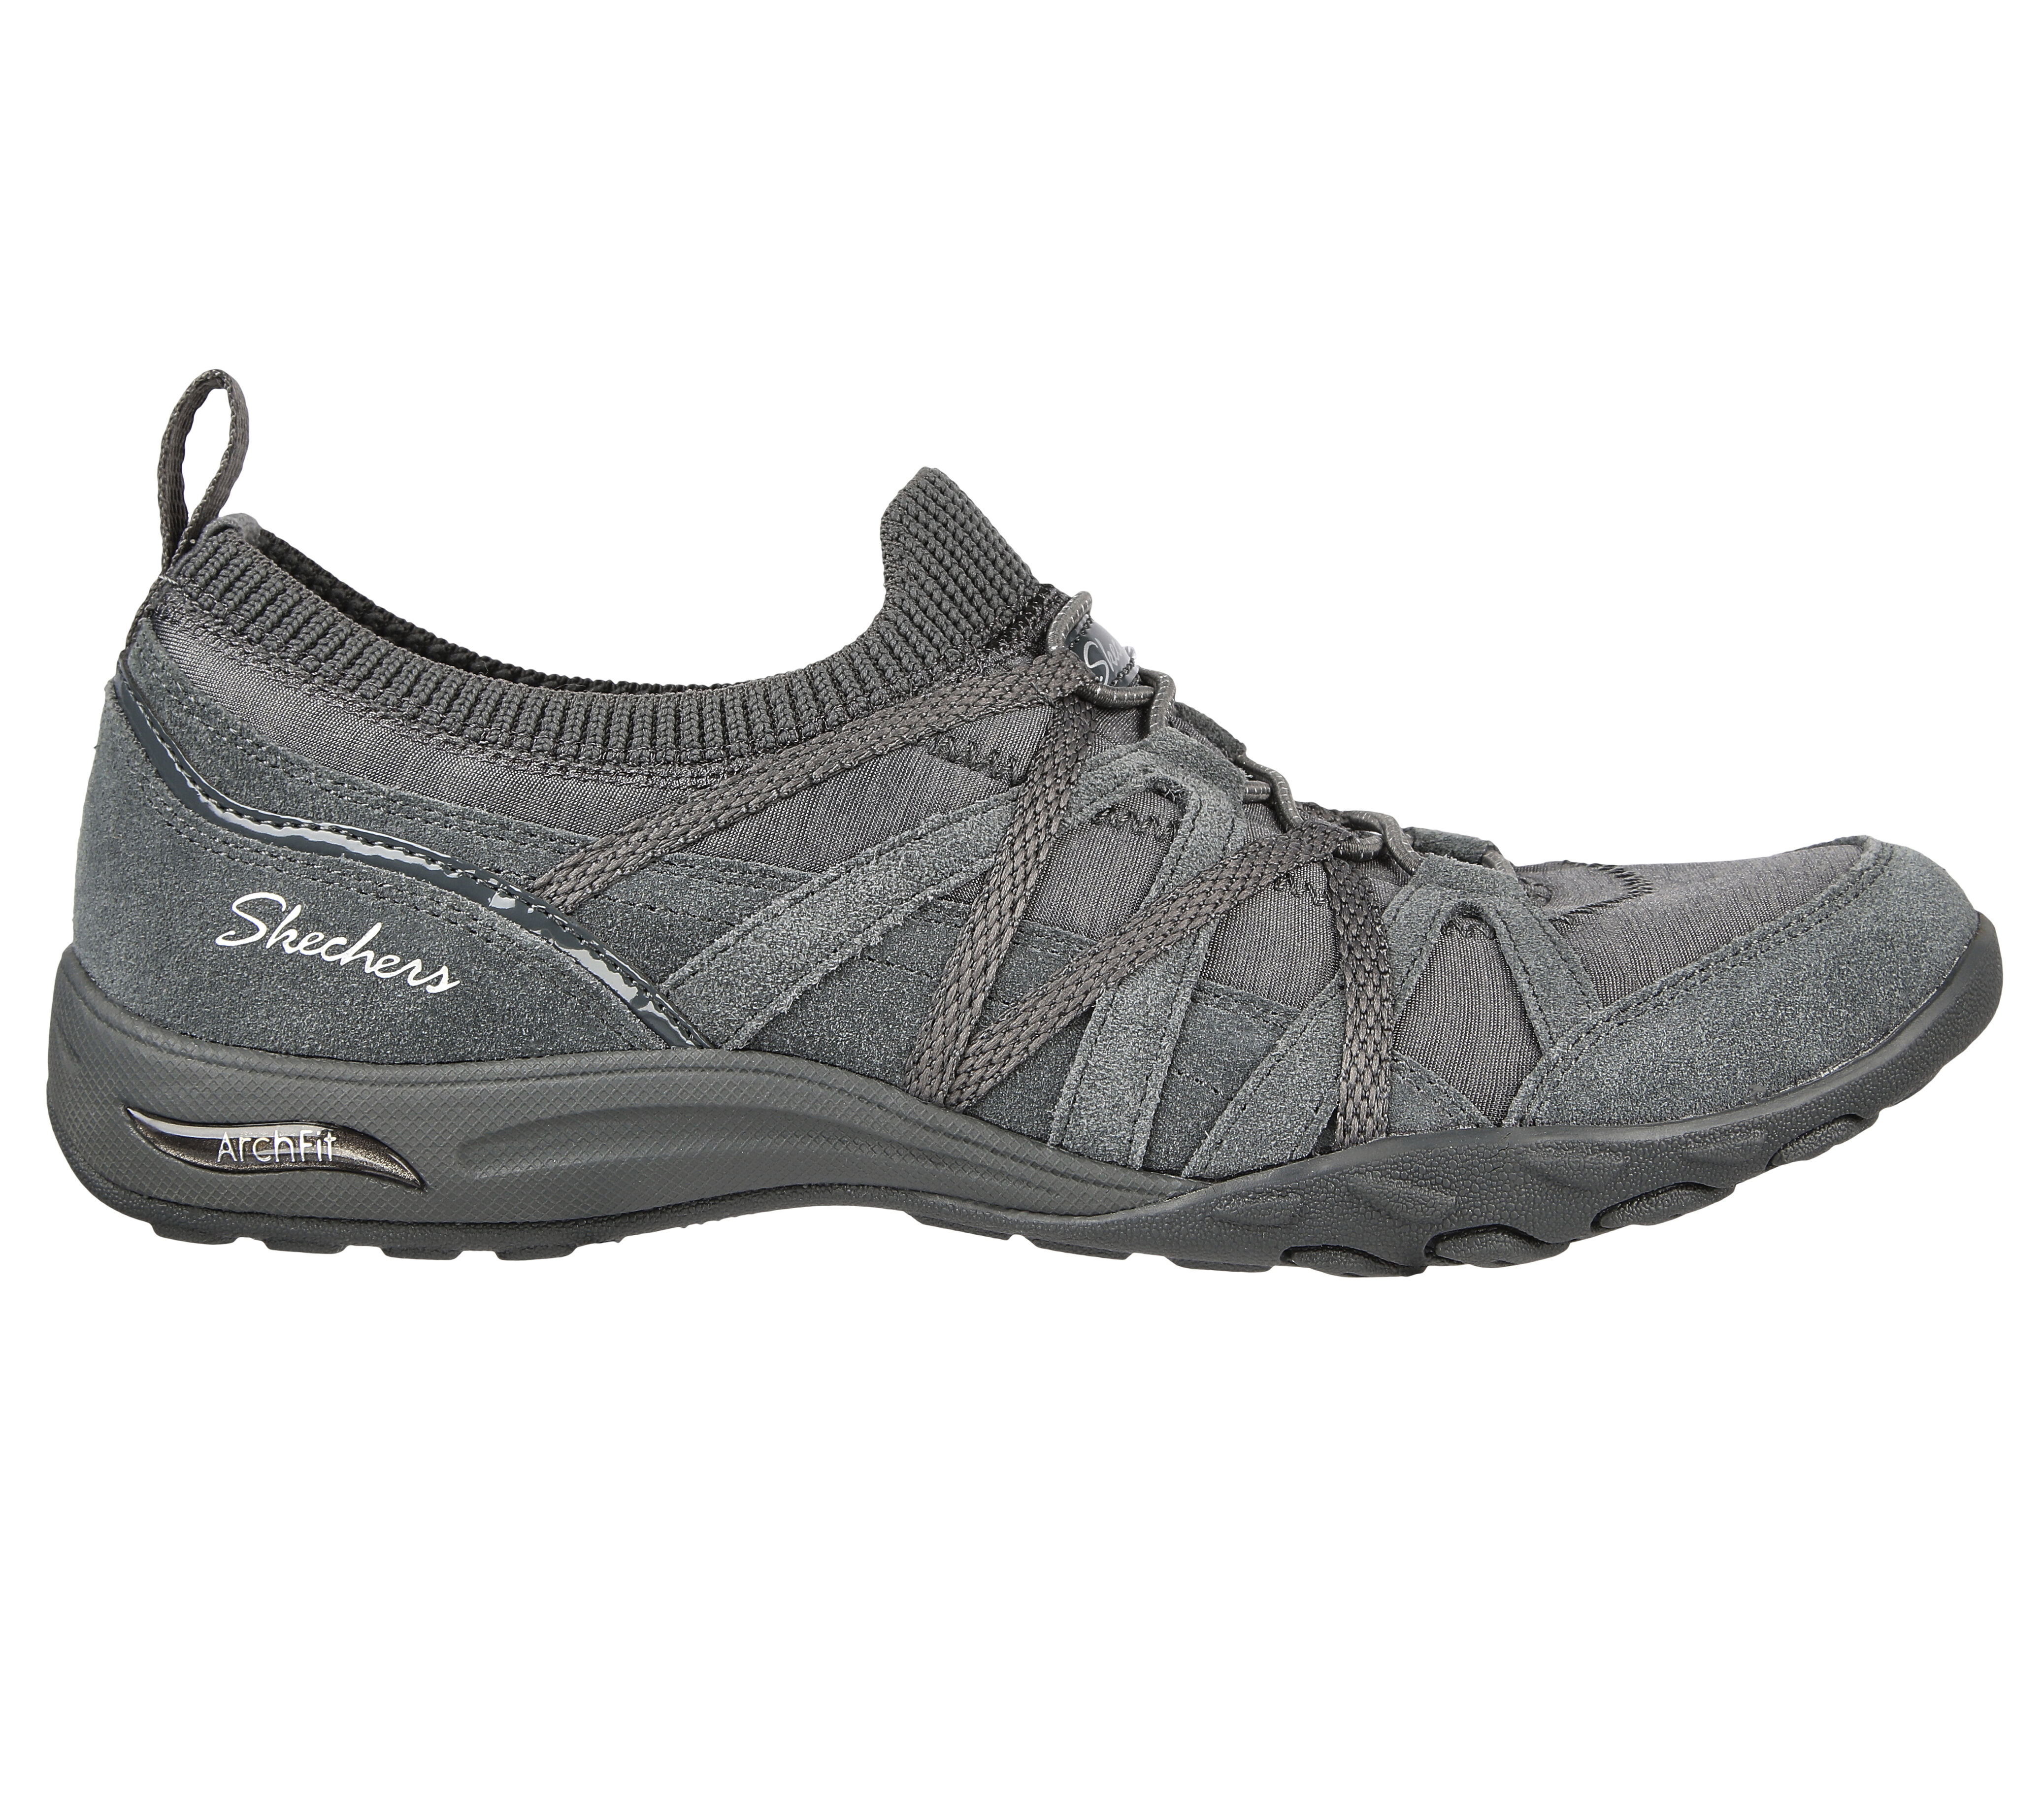 Skechers Relaxed Fit: Lugwin - Embry Navy - Size 9.5